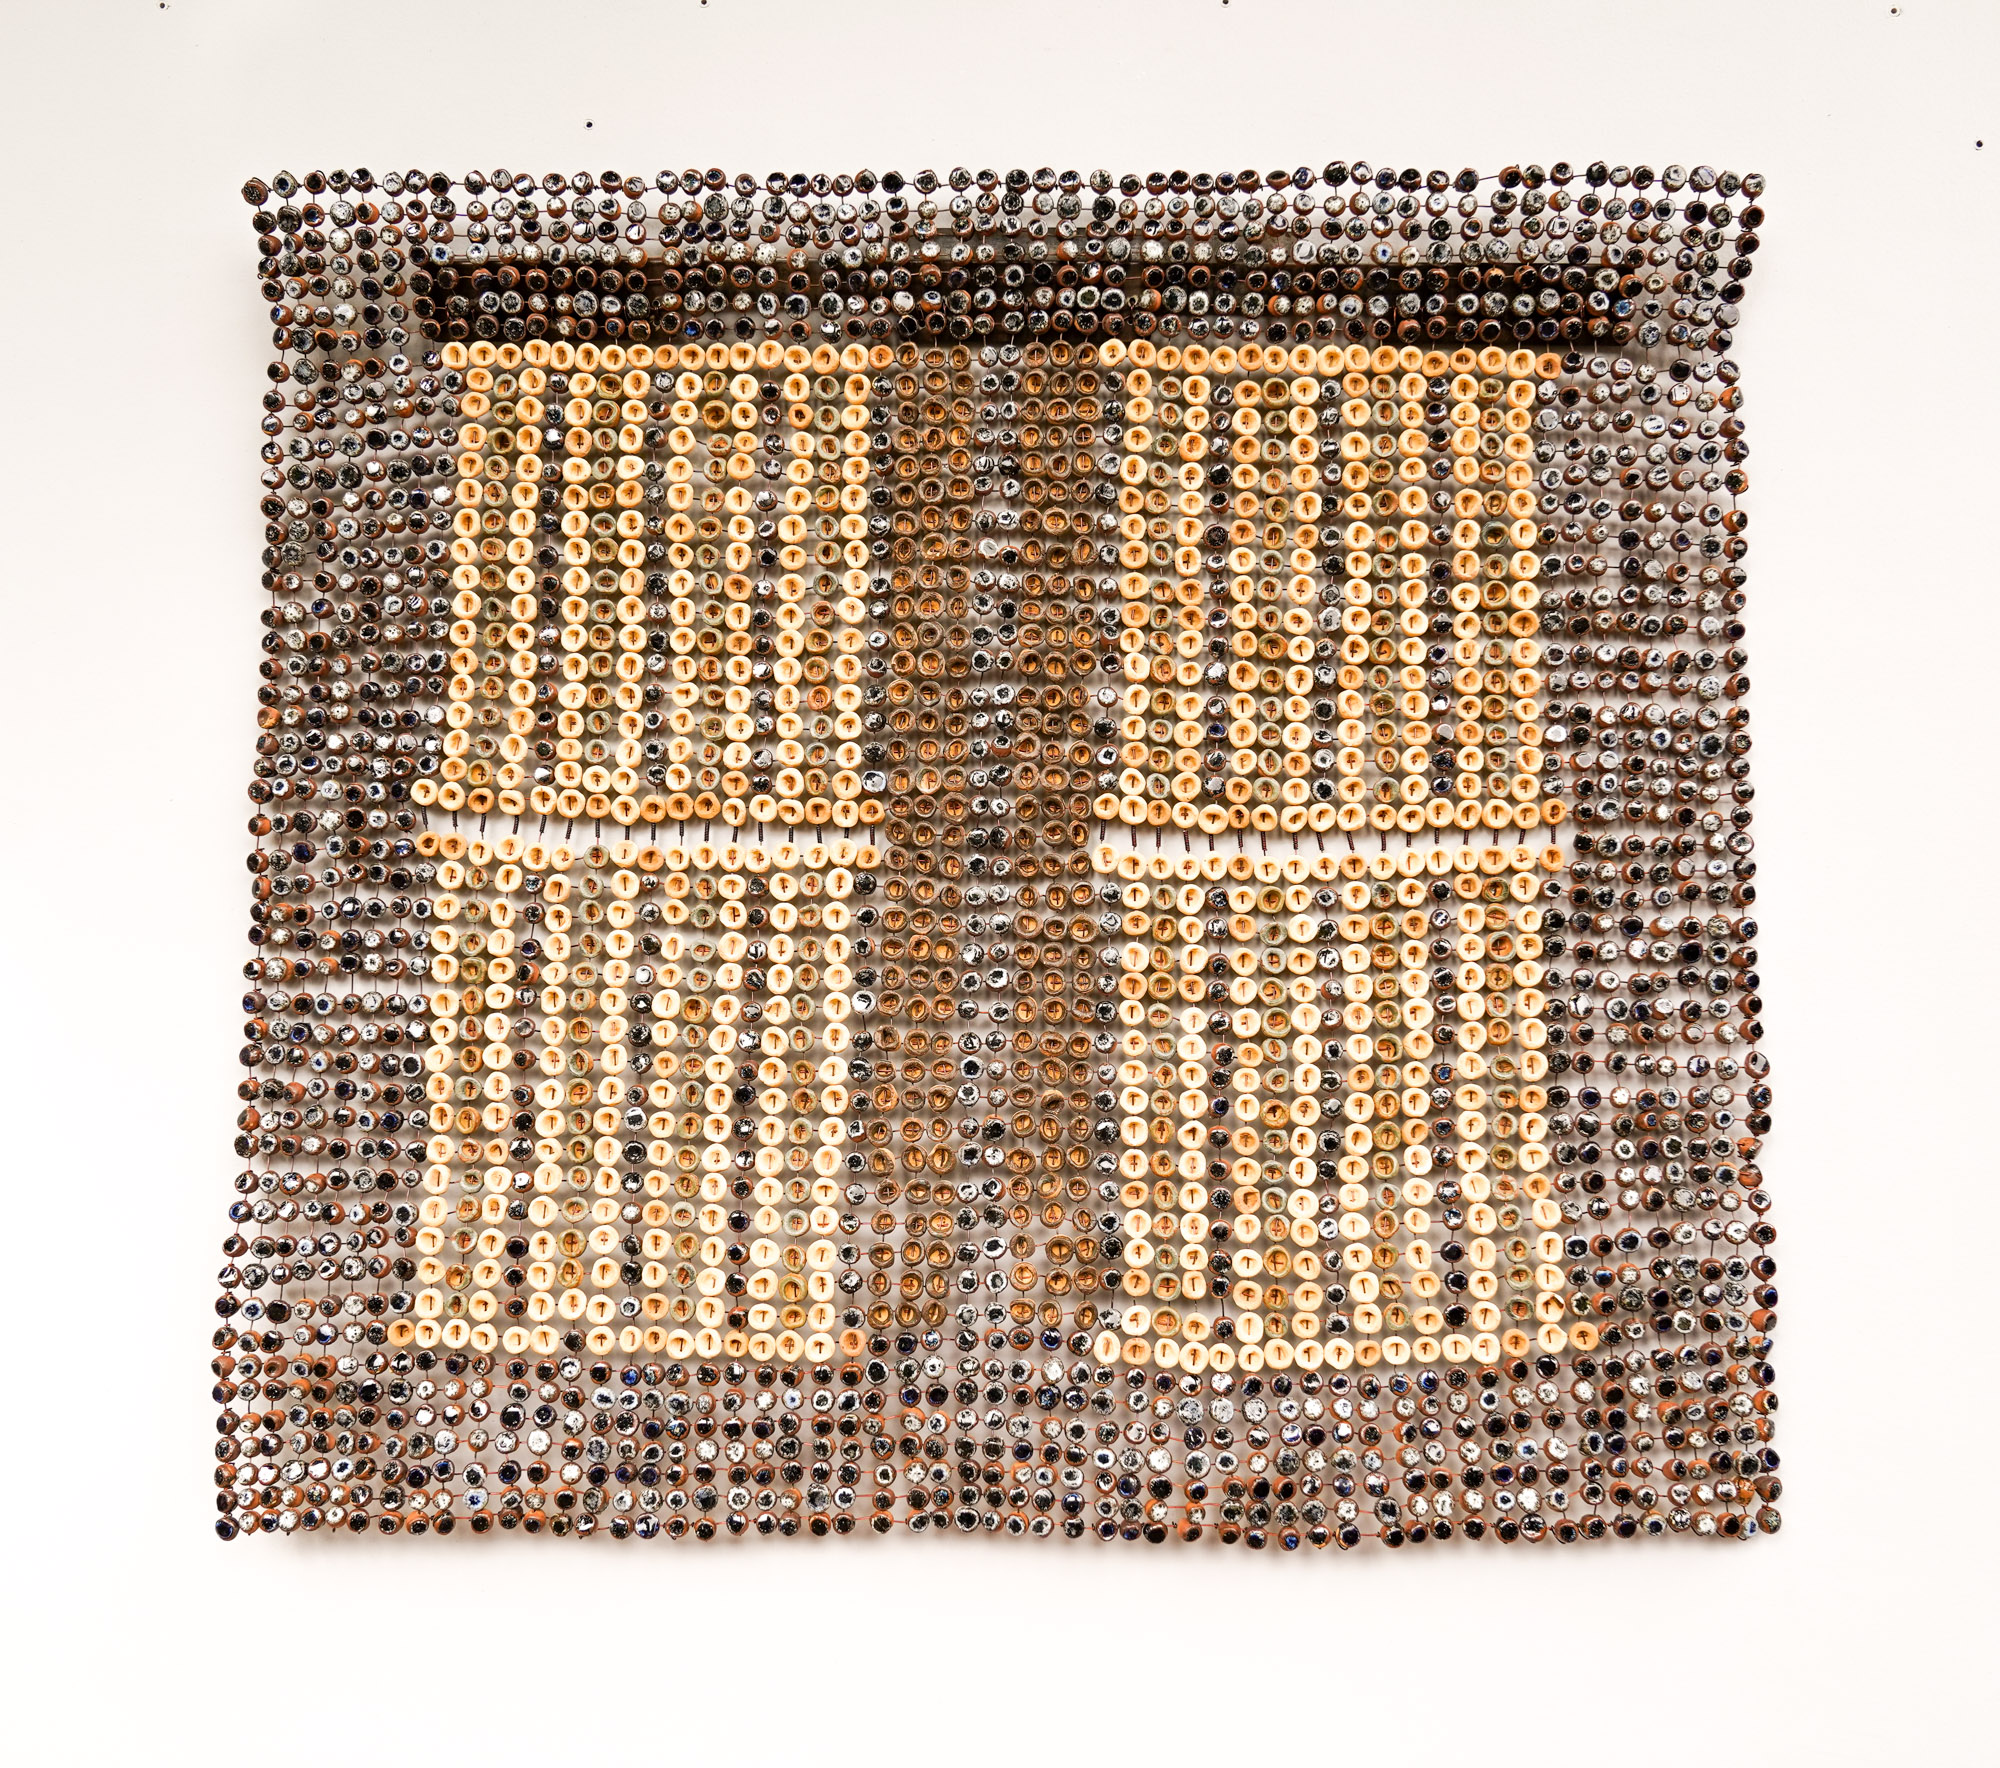 Akwaete Woman's Weave II, 2023
earthenware and stoneware clays, ash glazes, recycled glasses and copper wires (2,800
ceramic palm kernel shell beads)
47.6 x 52.75 x 3.5 in (121 x 134 x 9 cm) -  Marc Straus Gallery